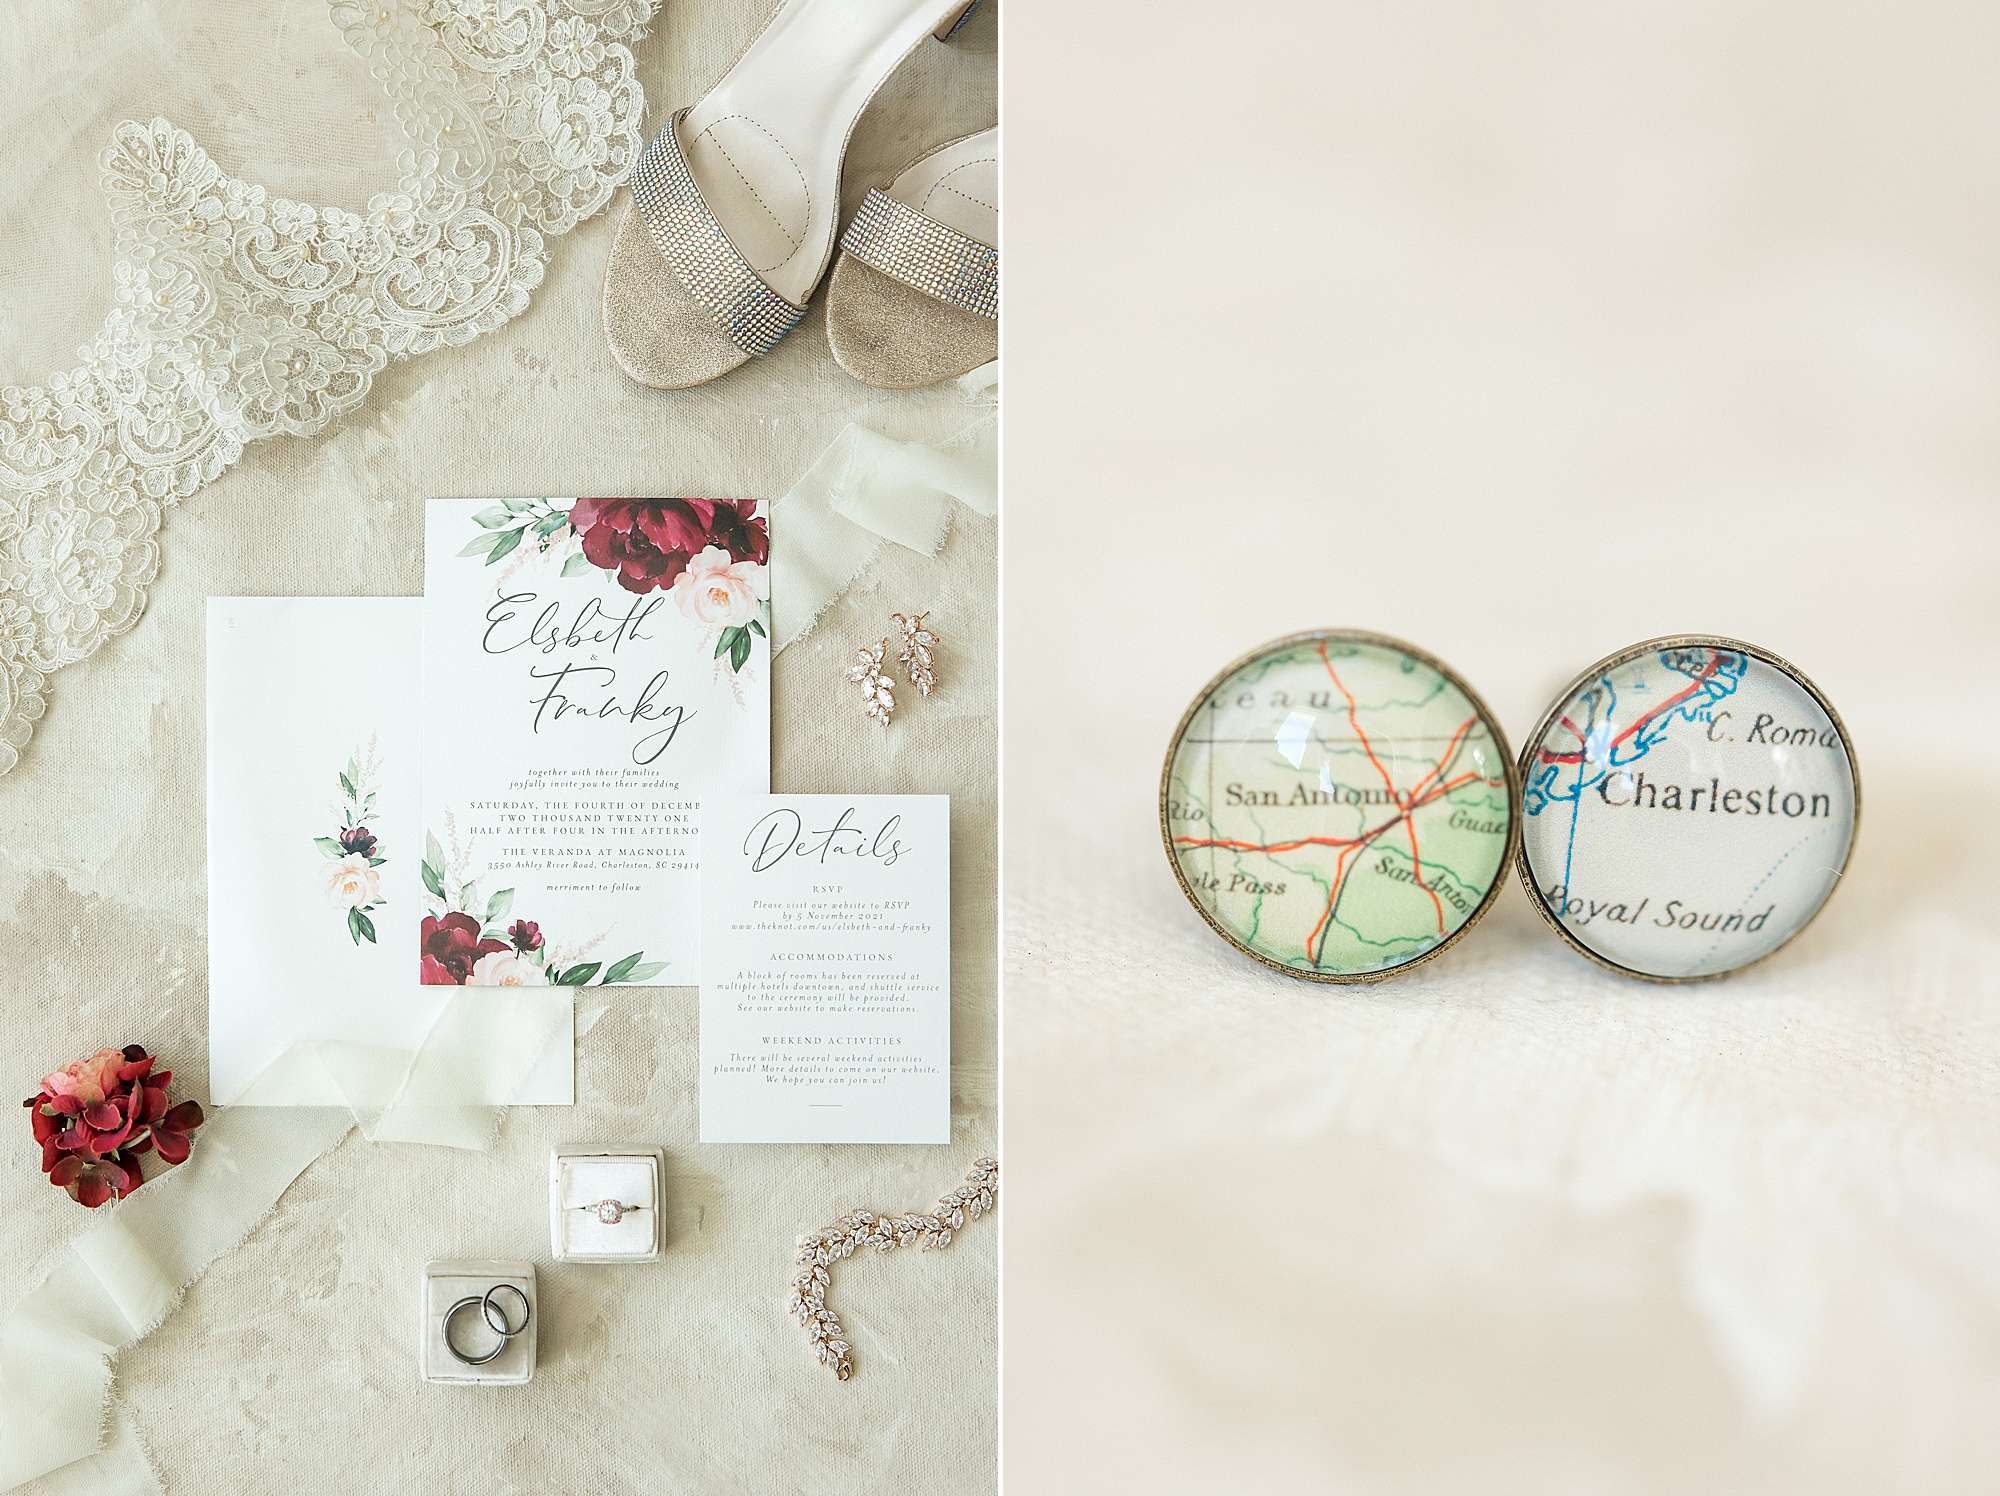 wedding invitations and details from SC wedding